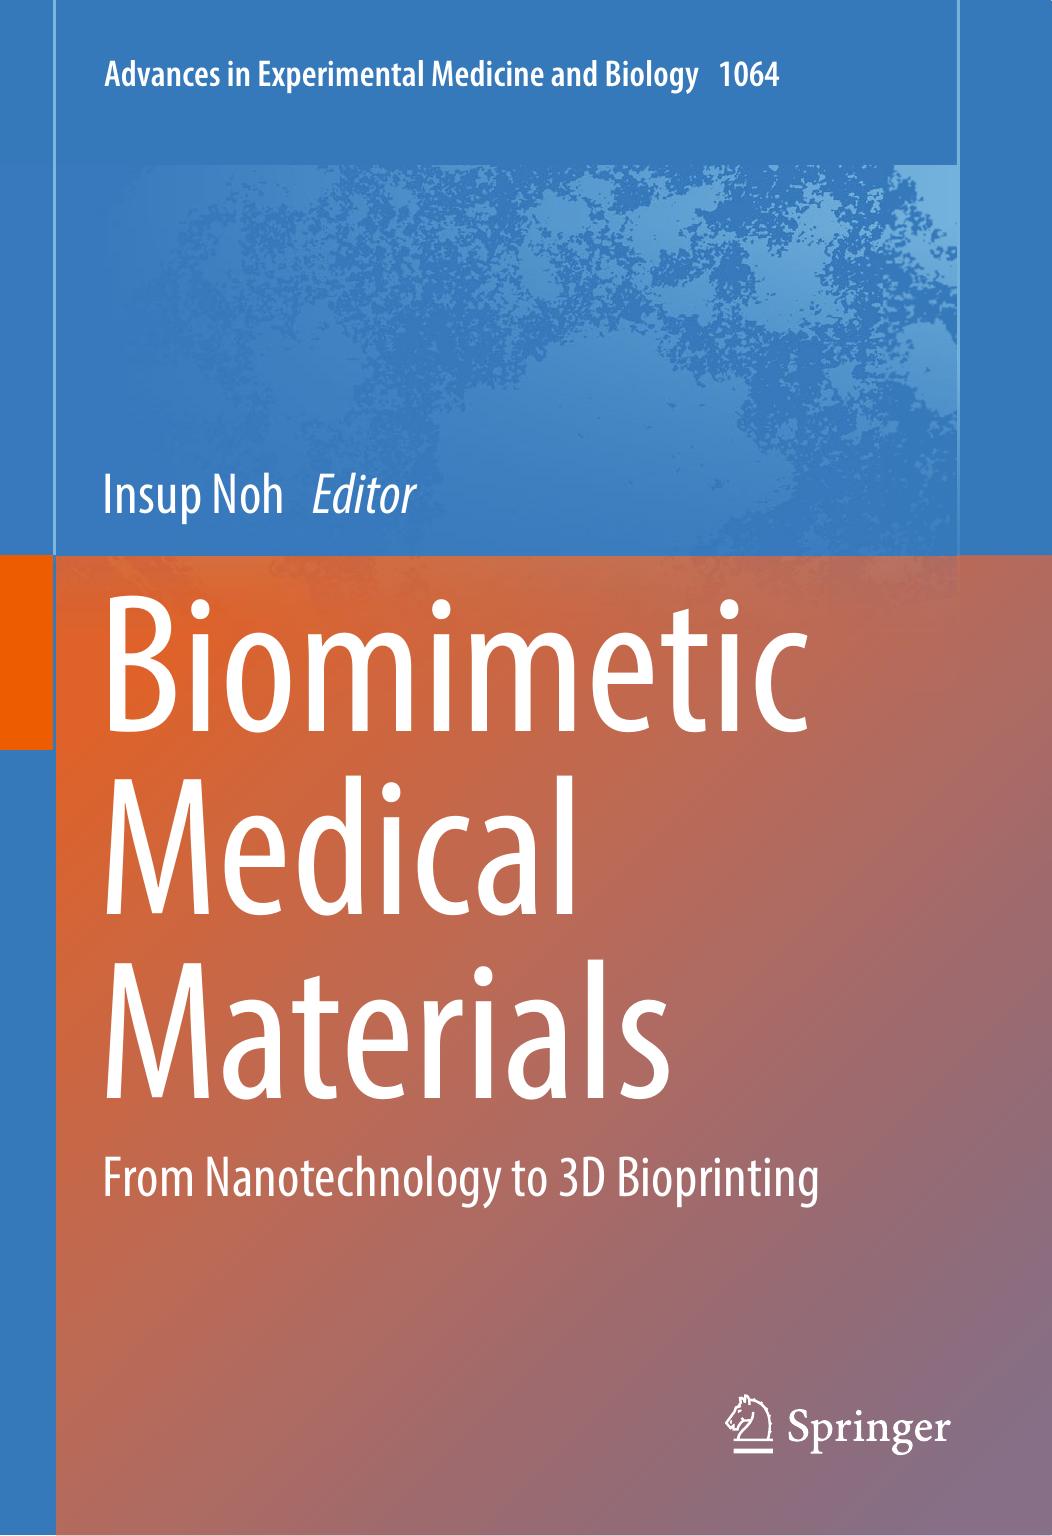 Biomimetic Medical Materials From Nanotechnology to 3D Bioprinting 2018